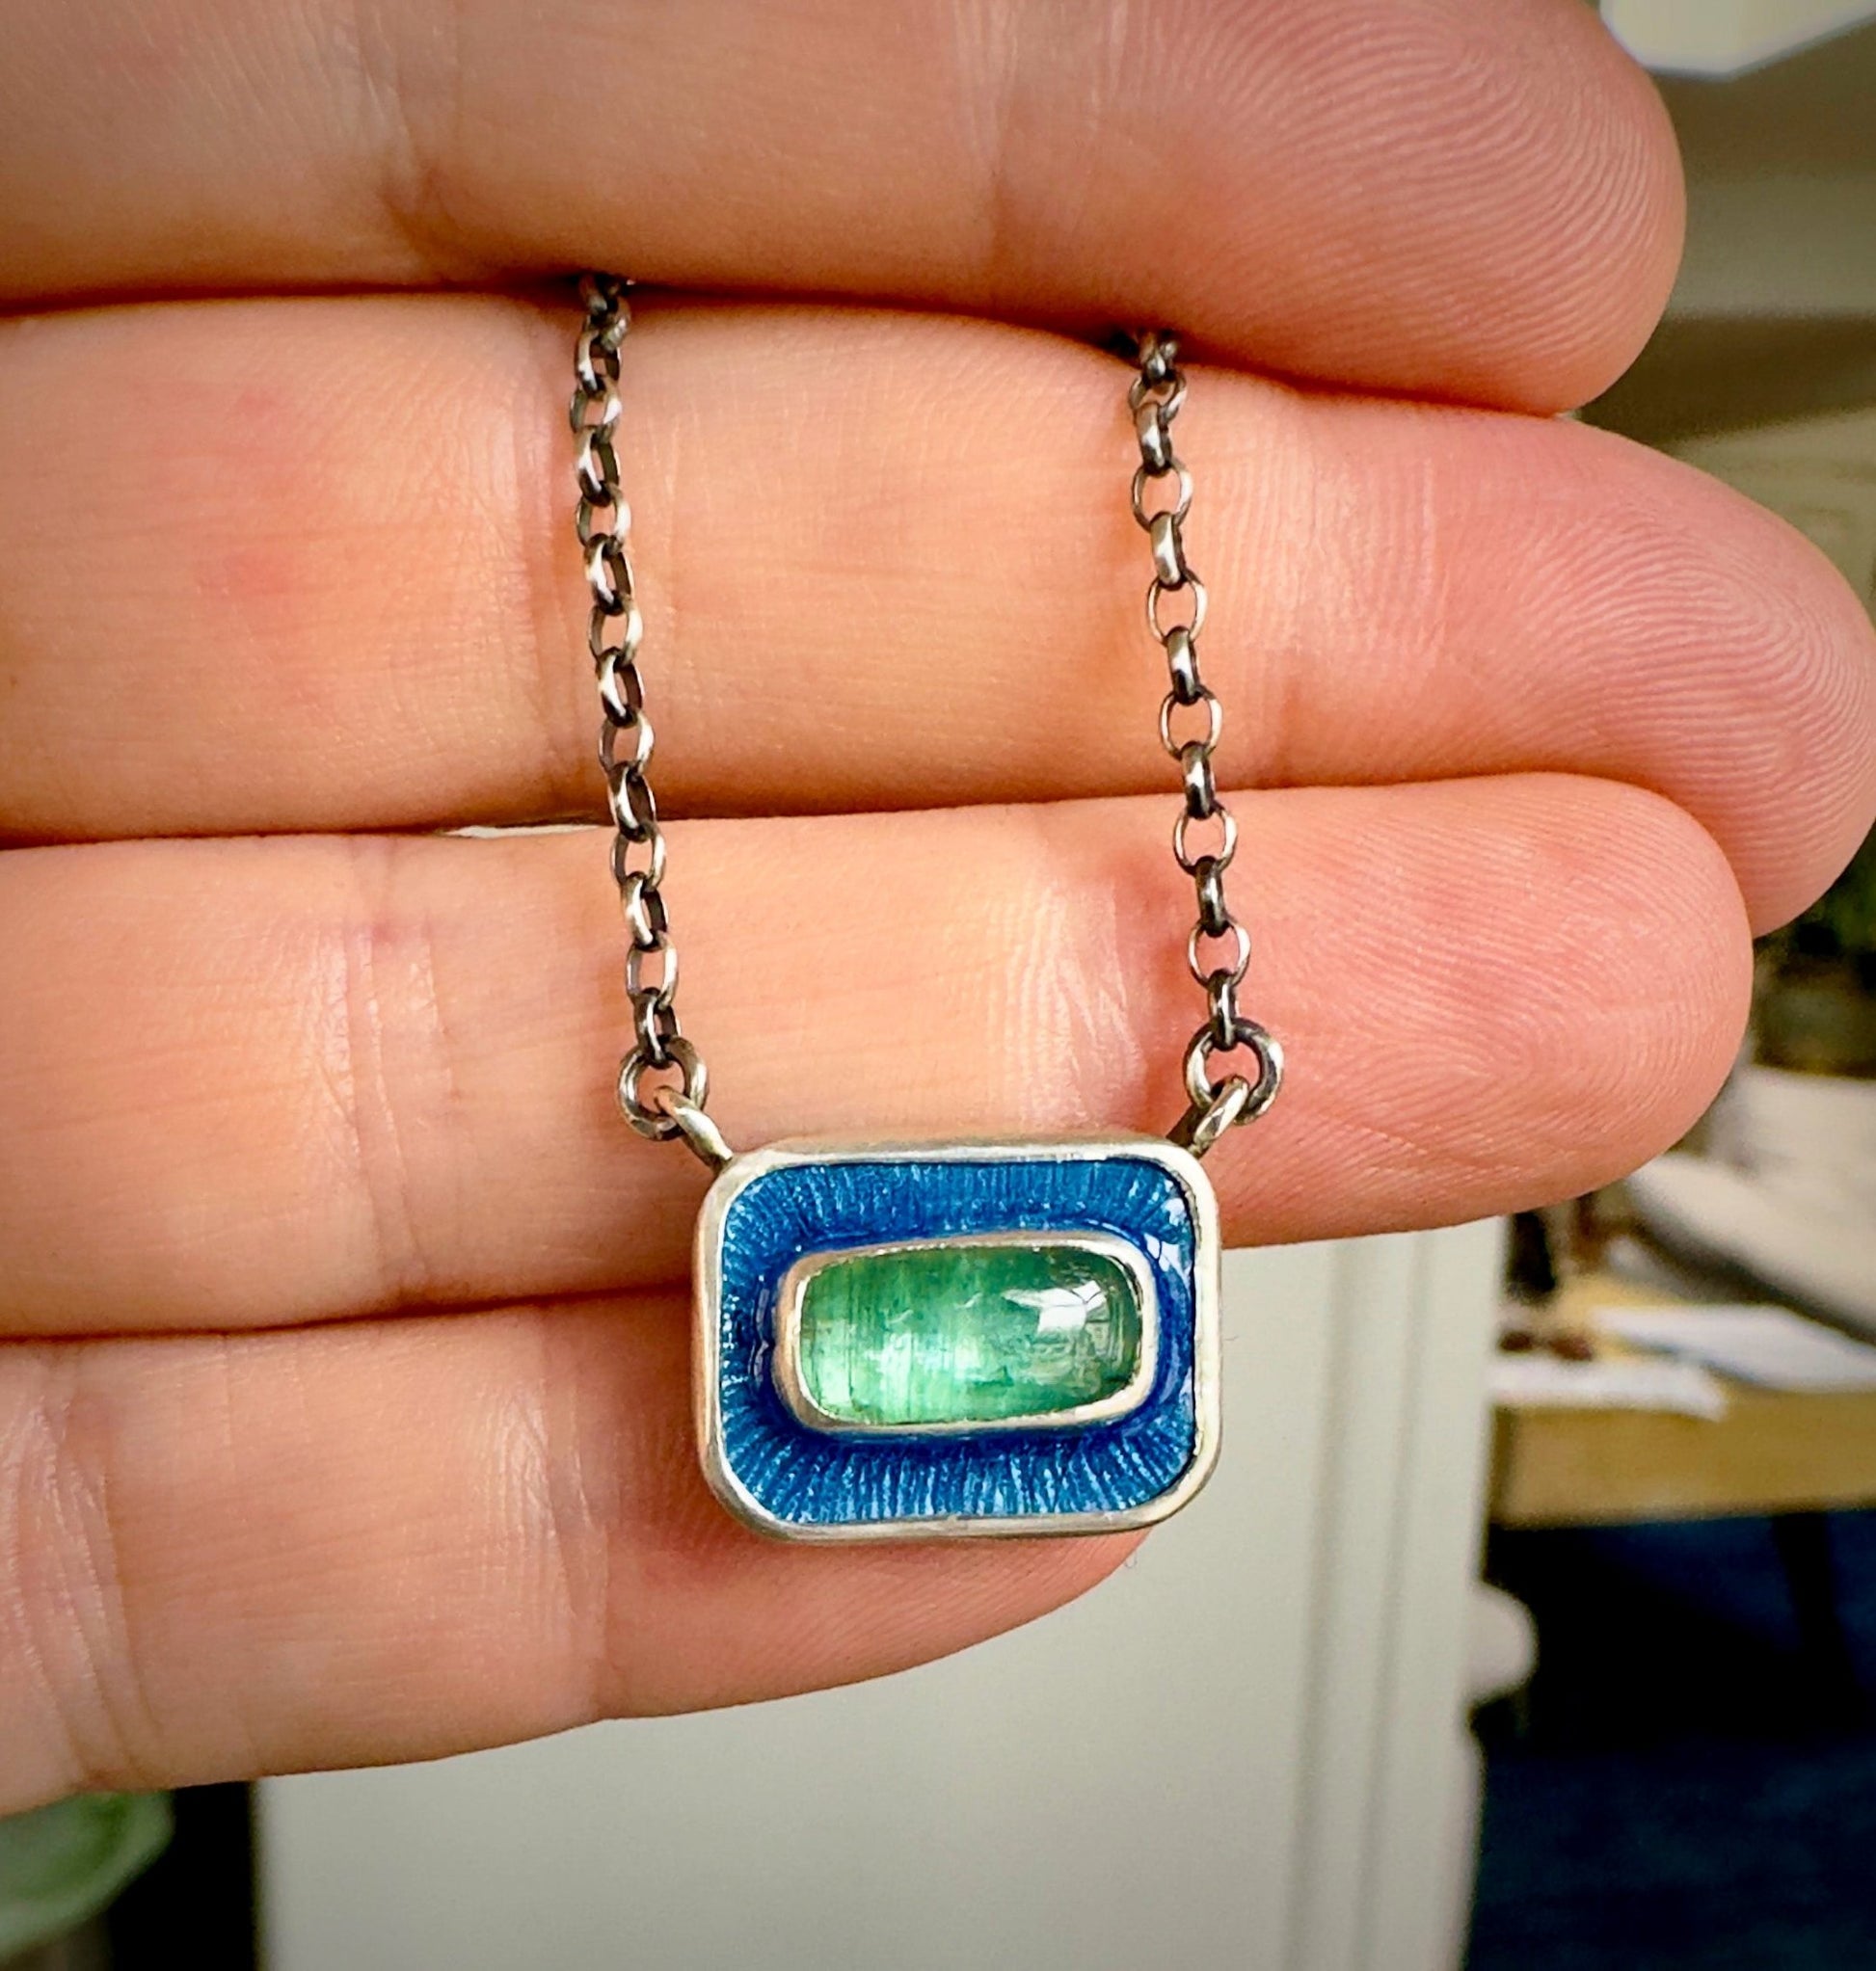 Green Kyanite & Blue Enamel Chiclet Necklace - Bluecave Jewelry